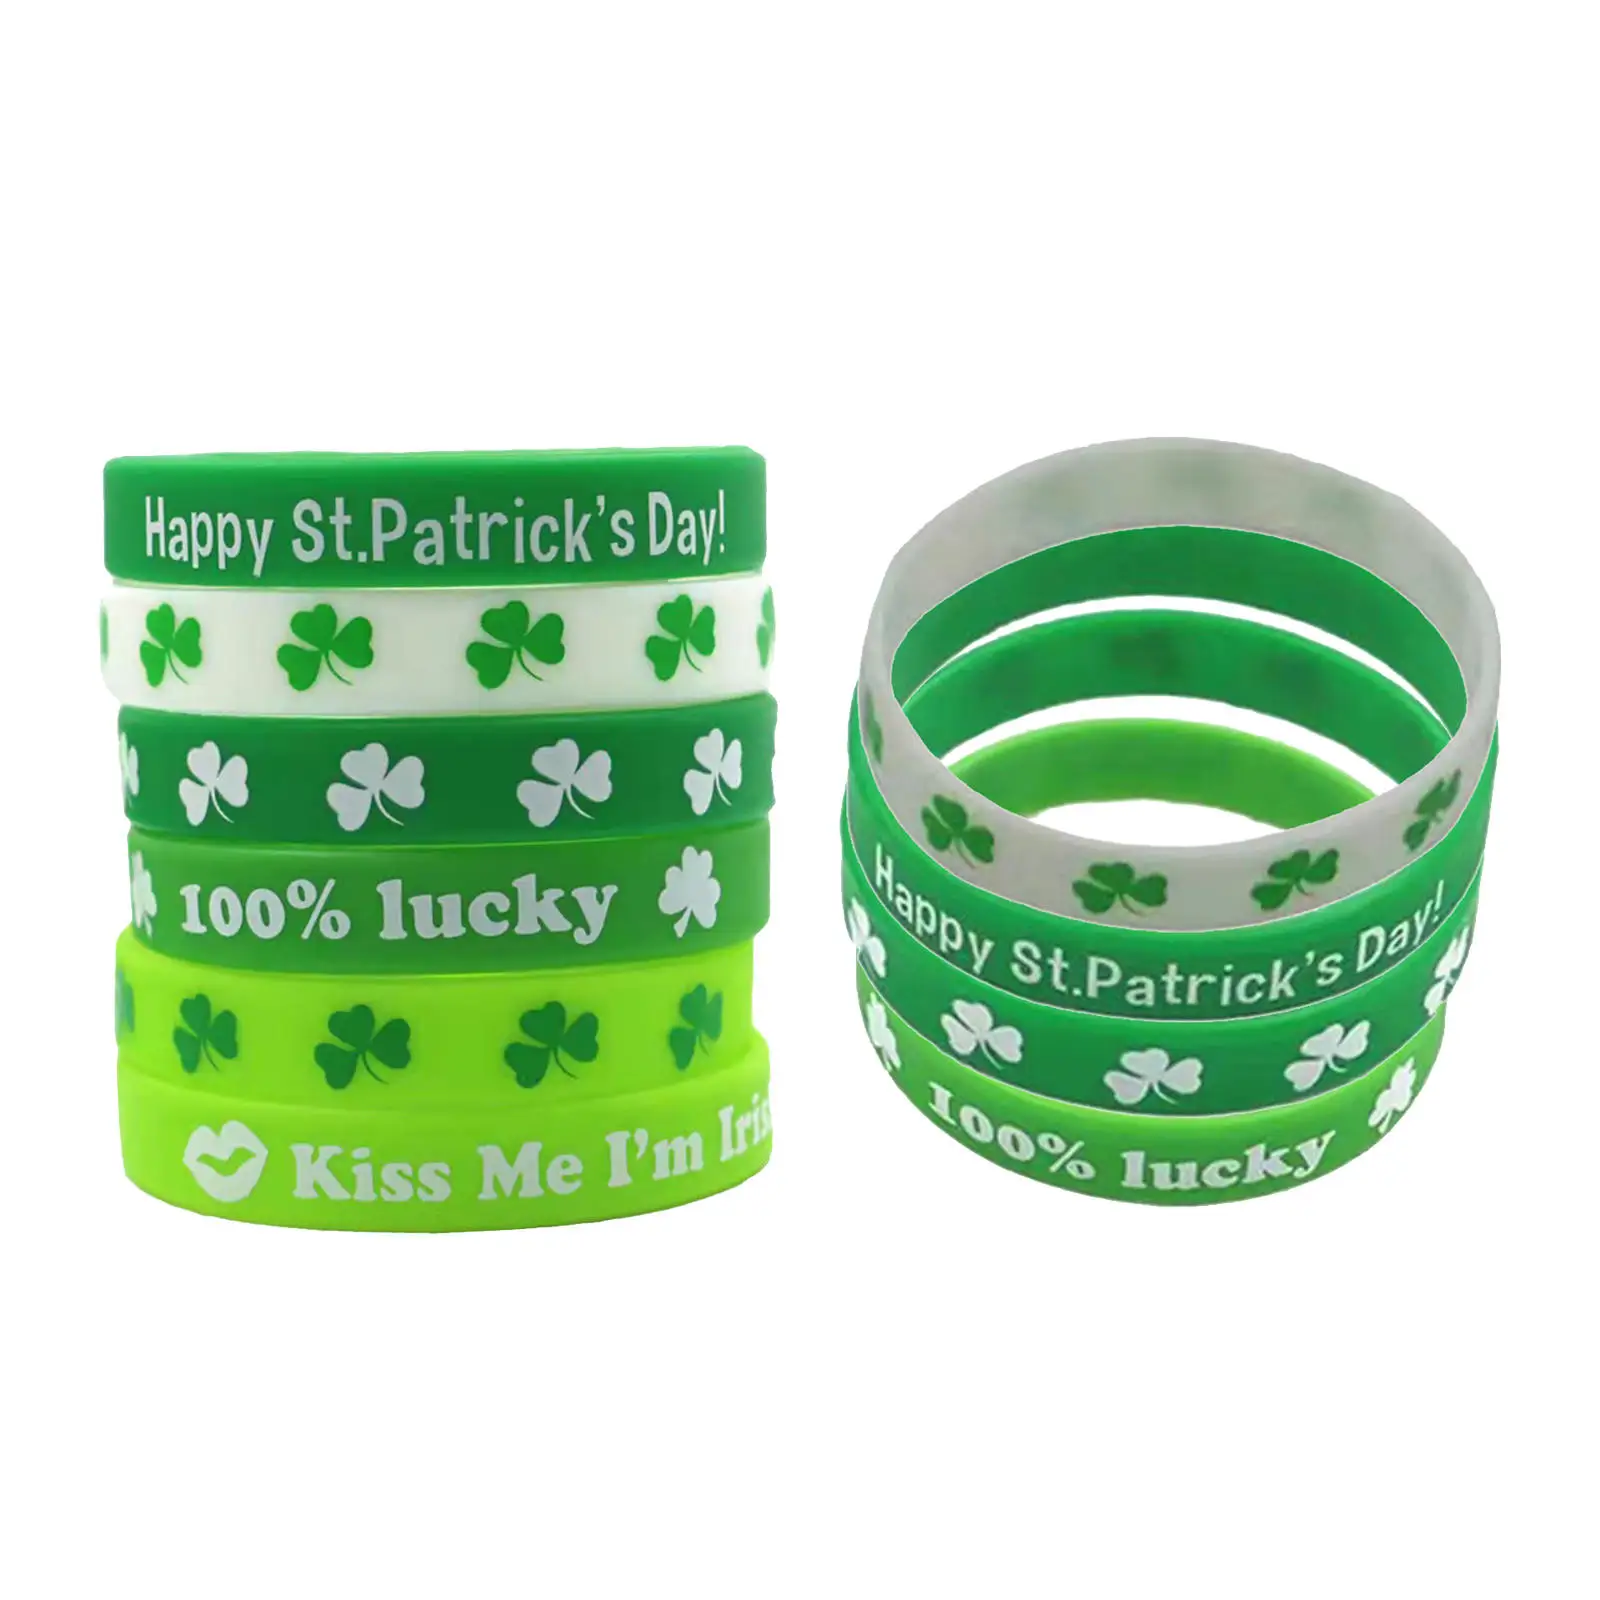 Rubber Wristbands `S Day Shamrock Lucky Silicone Irish Letters Green Bracelets for Gifts Decoration Adults Women Men